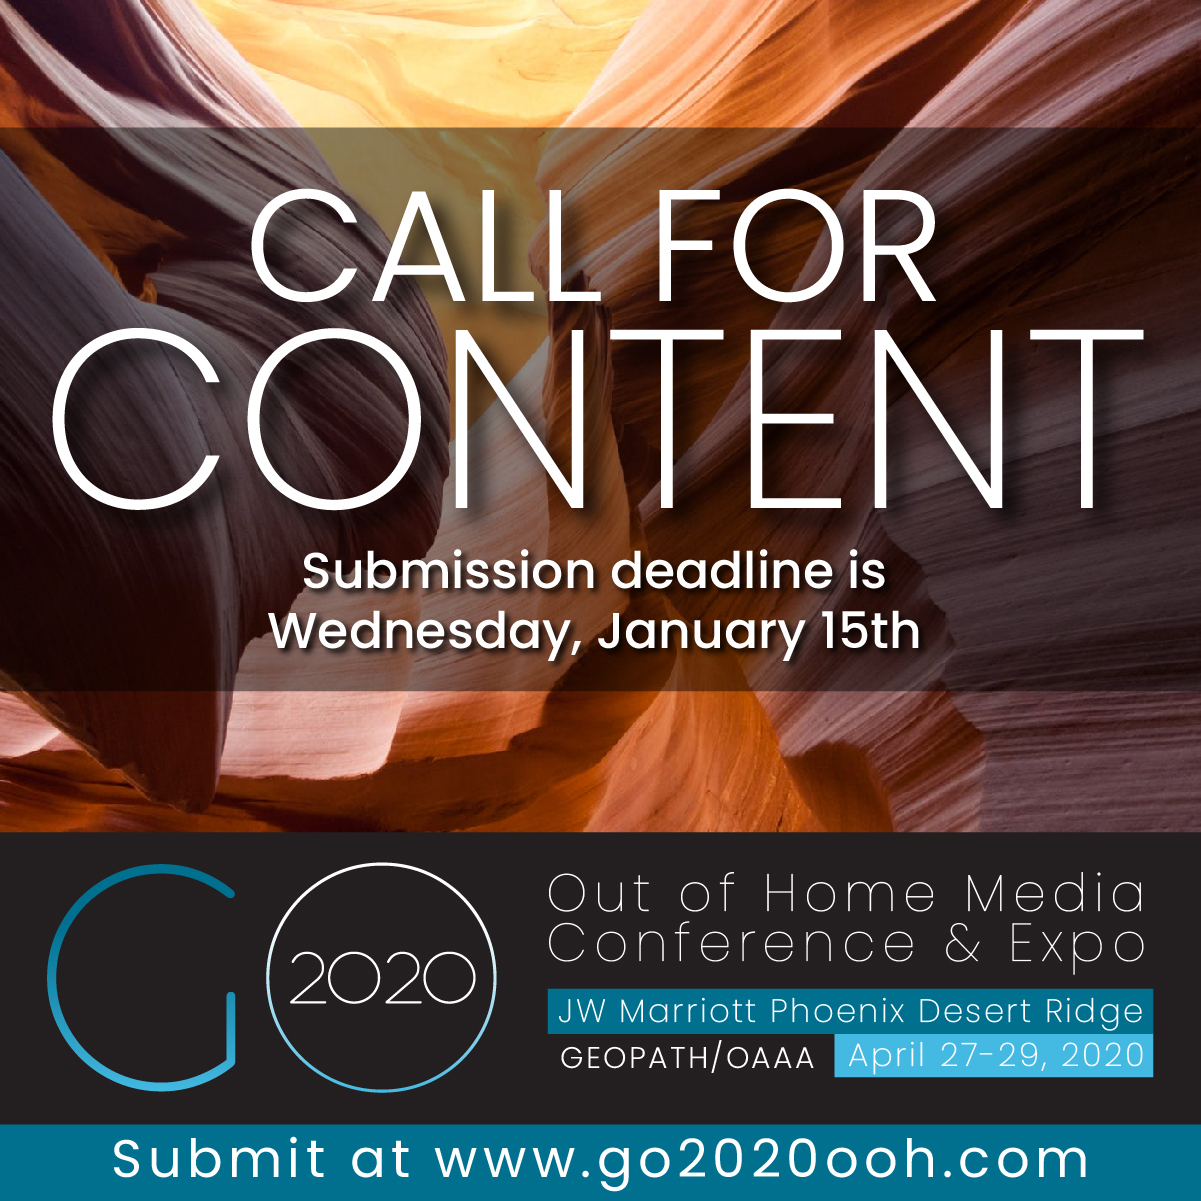 Geopath and OAAA Seeking Speakers and Presenters for 2020 Out of Home